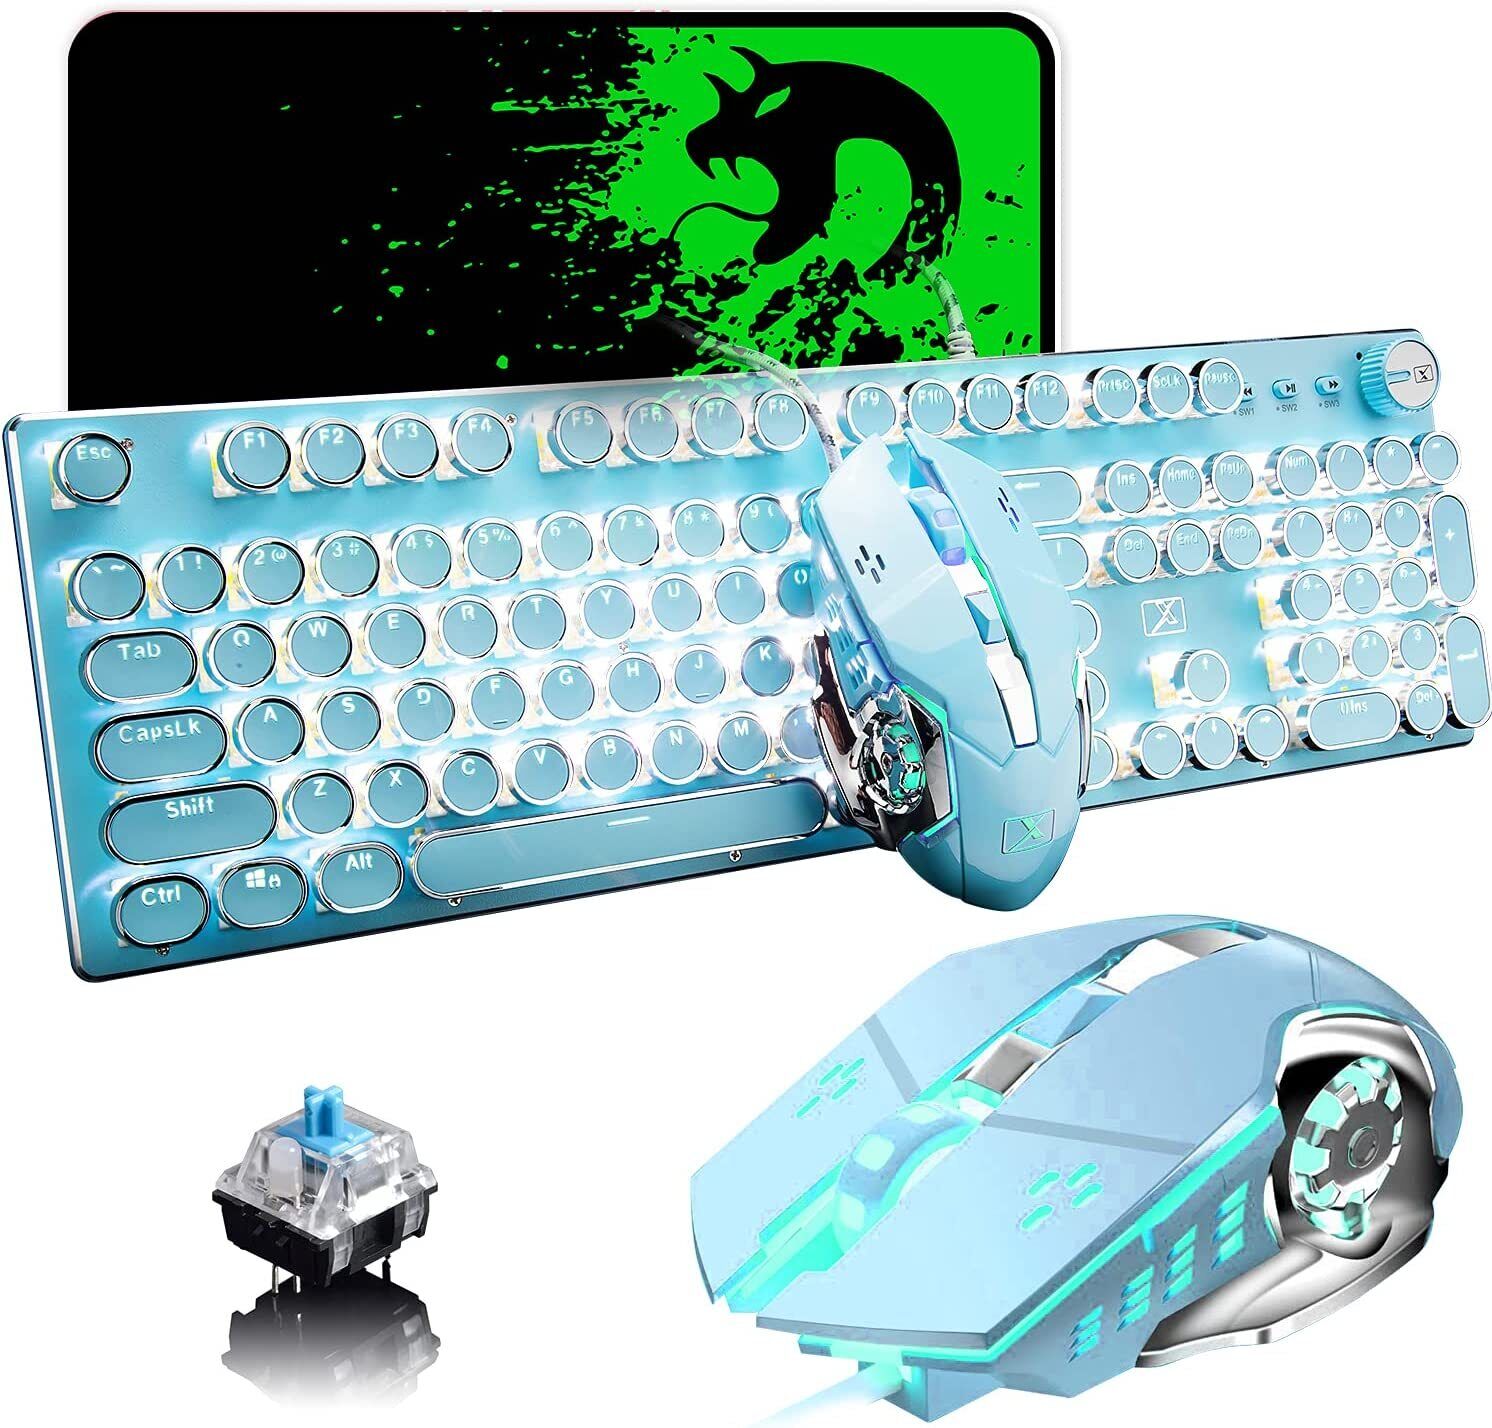 Retro Vintage Mechanical Gaming Keyboard Mouse White LED Backlit Wired Cute 